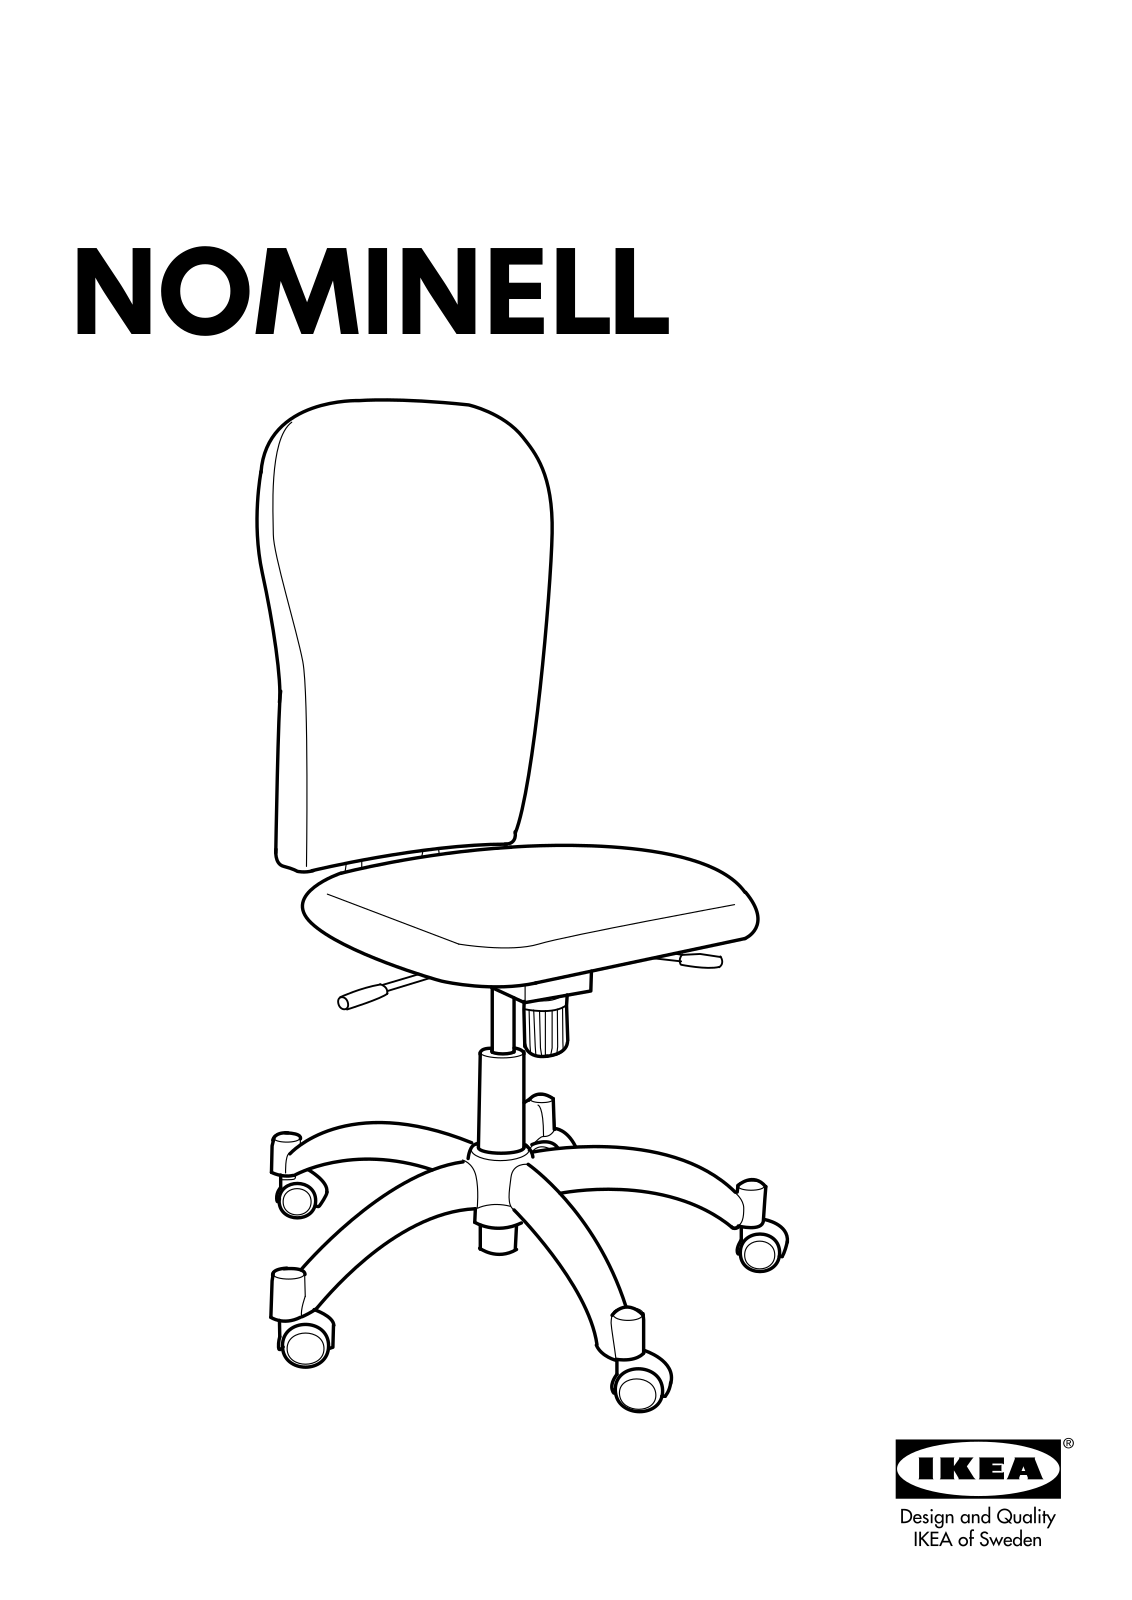 IKEA NOMINELL User Manual